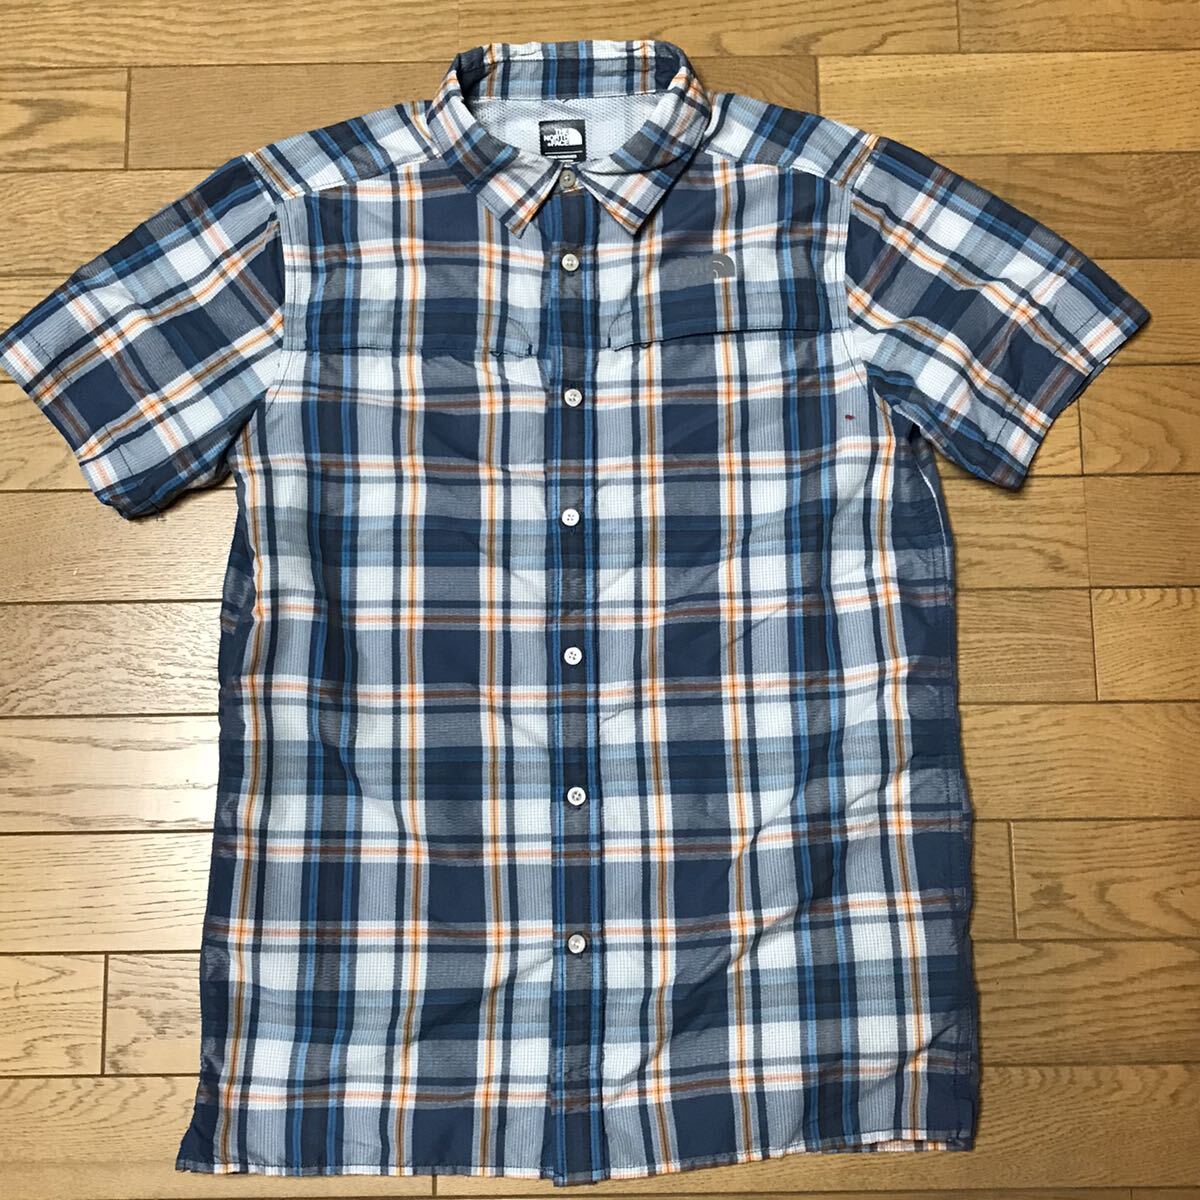 THE NORTH FACE MEN’S SHORT SLEEVE SHIRTS size-S(着丈72身幅52) 中古(試着のみ) 送料無料 NCNR_画像1